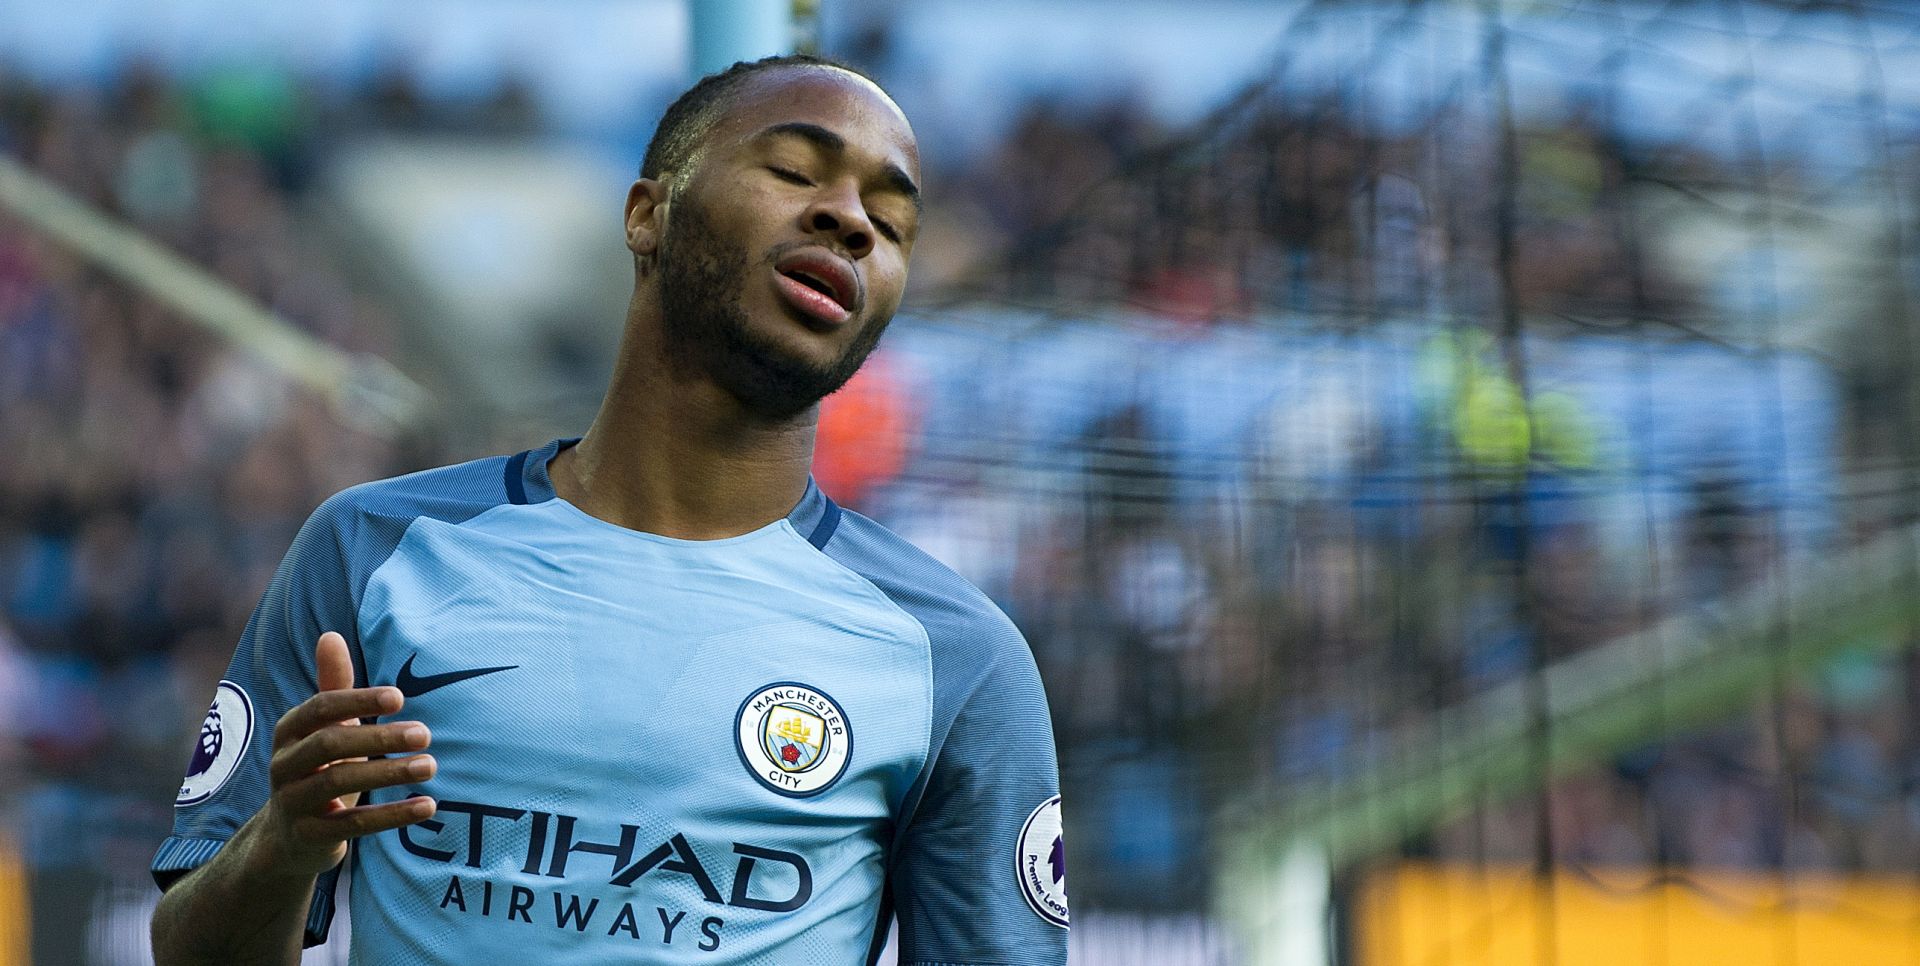 epa07221382 (FILE)  Manchester City's Raheem Sterling reacts during the English Premier League soccer match between Manchester City and Southampton at the Etihad Stadium in Manchester, Britain, 23 October 2016 (reissued 10 December 2018). Police officers have interviewed Raheem Sterling after the Manchester City player was subjected to alleged racial abuse from Chelsea supporters, according to reports on 10 December 2018.  EPA/PETER POWELL EDITORIAL USE ONLY. No use with unauthorized audio, video, data, fixture lists, club/league logos or 'live' services. Online in-match use limited to 75 images, no video emulation. No use in betting, games or single club/league/player publications.